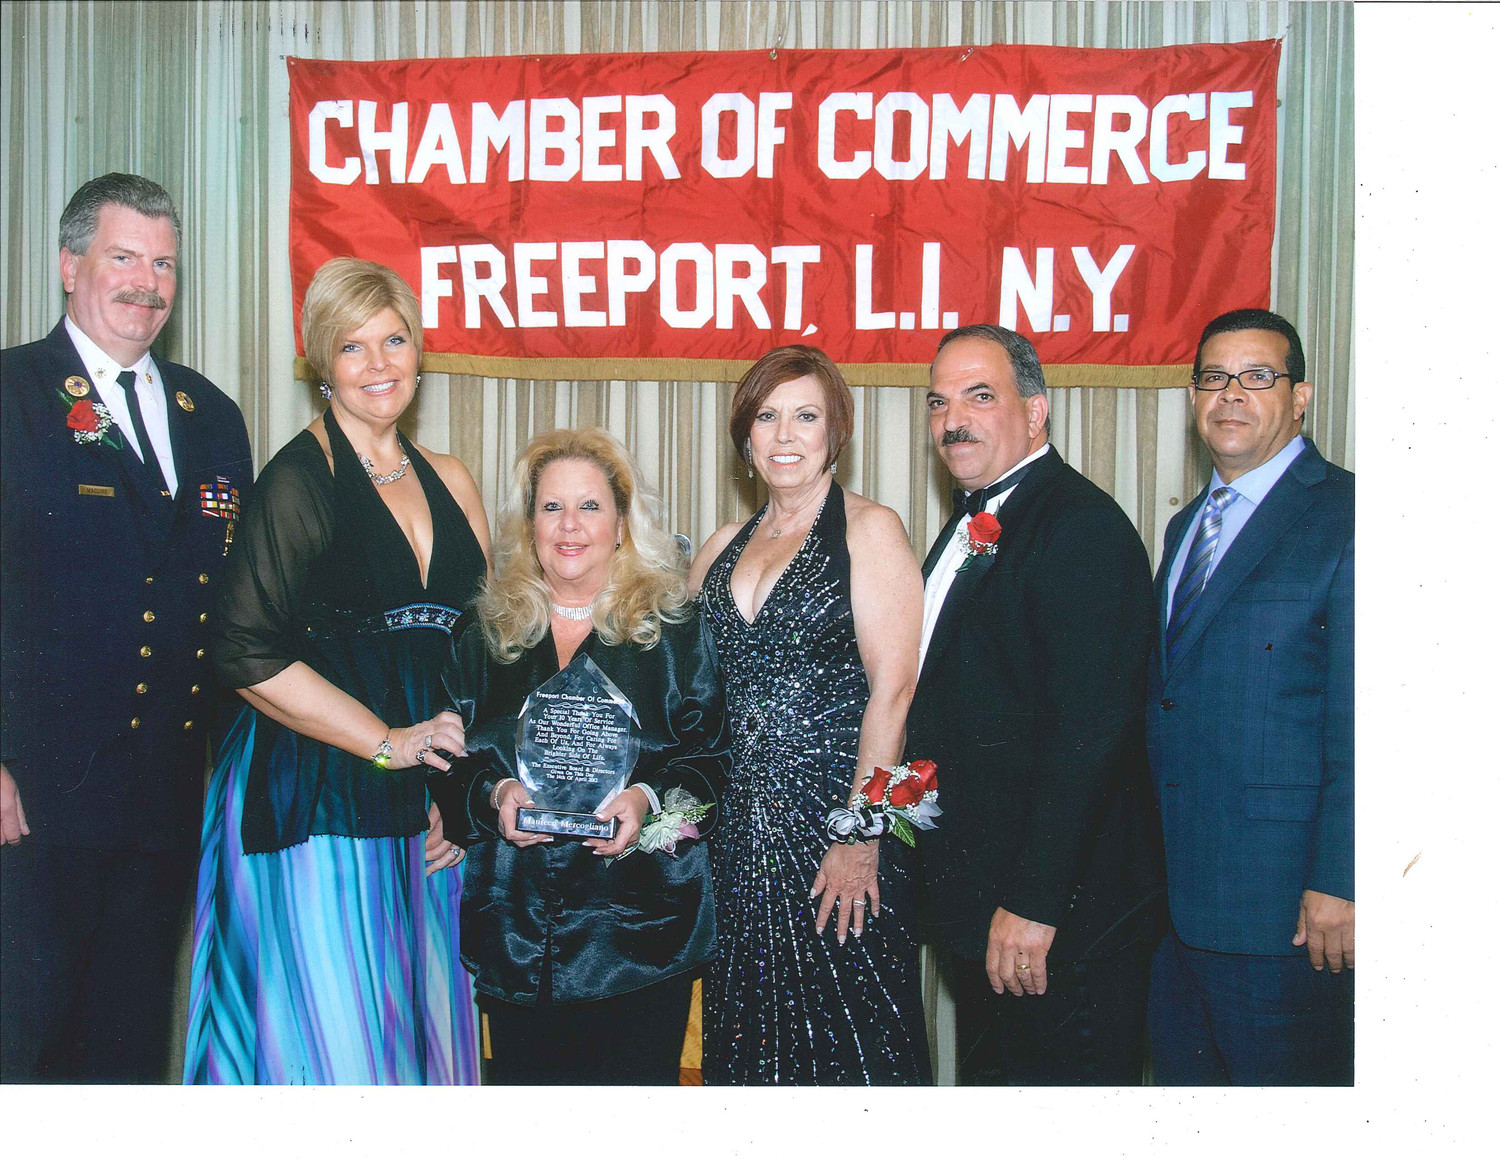 Maureen Mercogliano was given an award of recognition for 10 years of service to the Freeport Chamber of Commerce in 2011. From left were Ray Maguire, executive director of the Freeport Fire Department; Ilona Jagnow, owner of Otto’s Seagrill; Mercogliano, Jerri Quibell; former chamber President John Nuzzi; and Francisco Jorge.